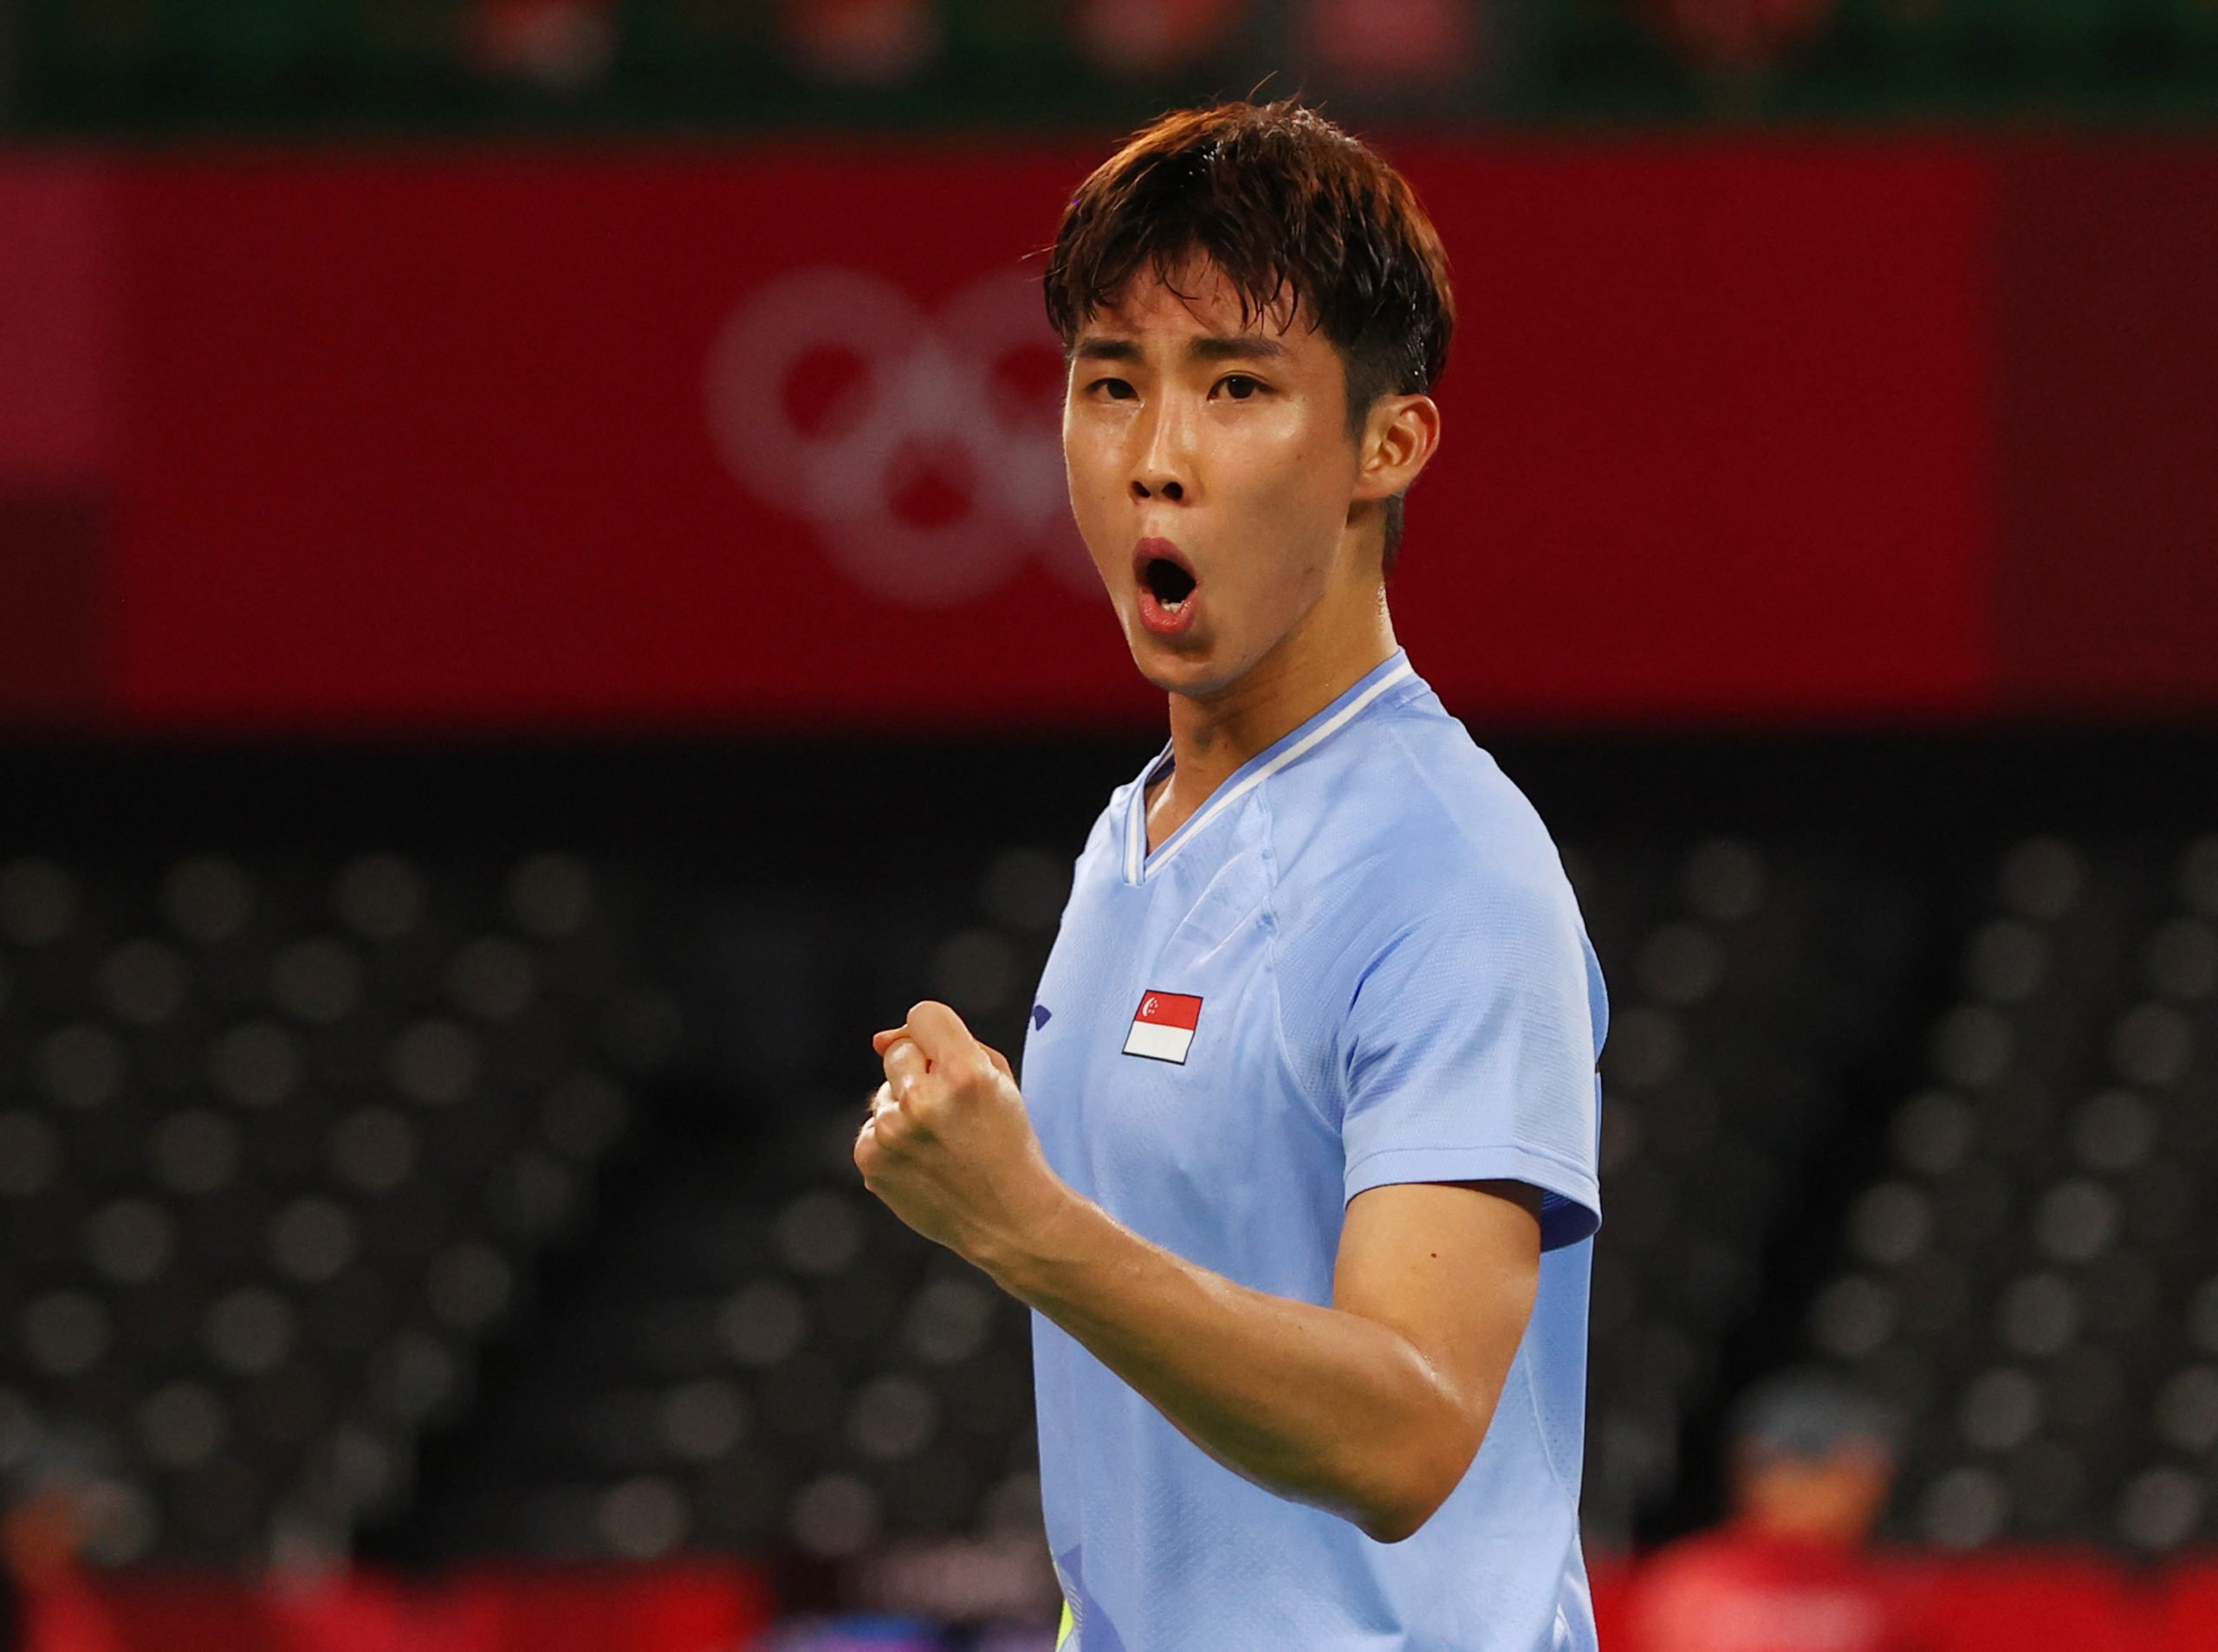 Loh overcomes ankle harm to turn out to be Singapore’s first badminton world champ